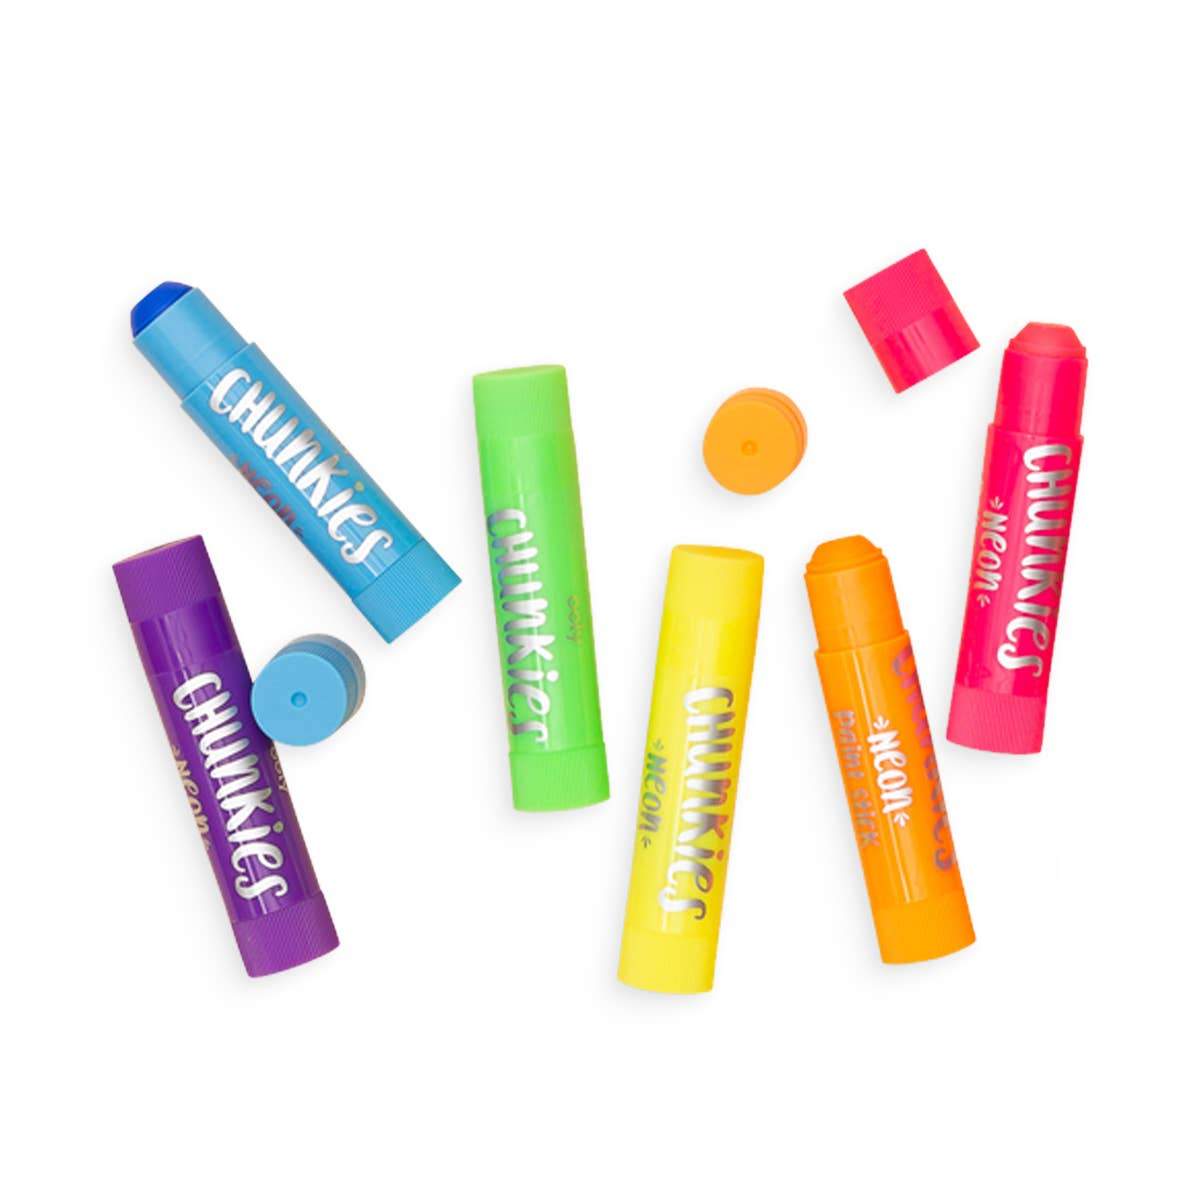 Magic Puffy Pens - Tiddlywinks Toys And Games